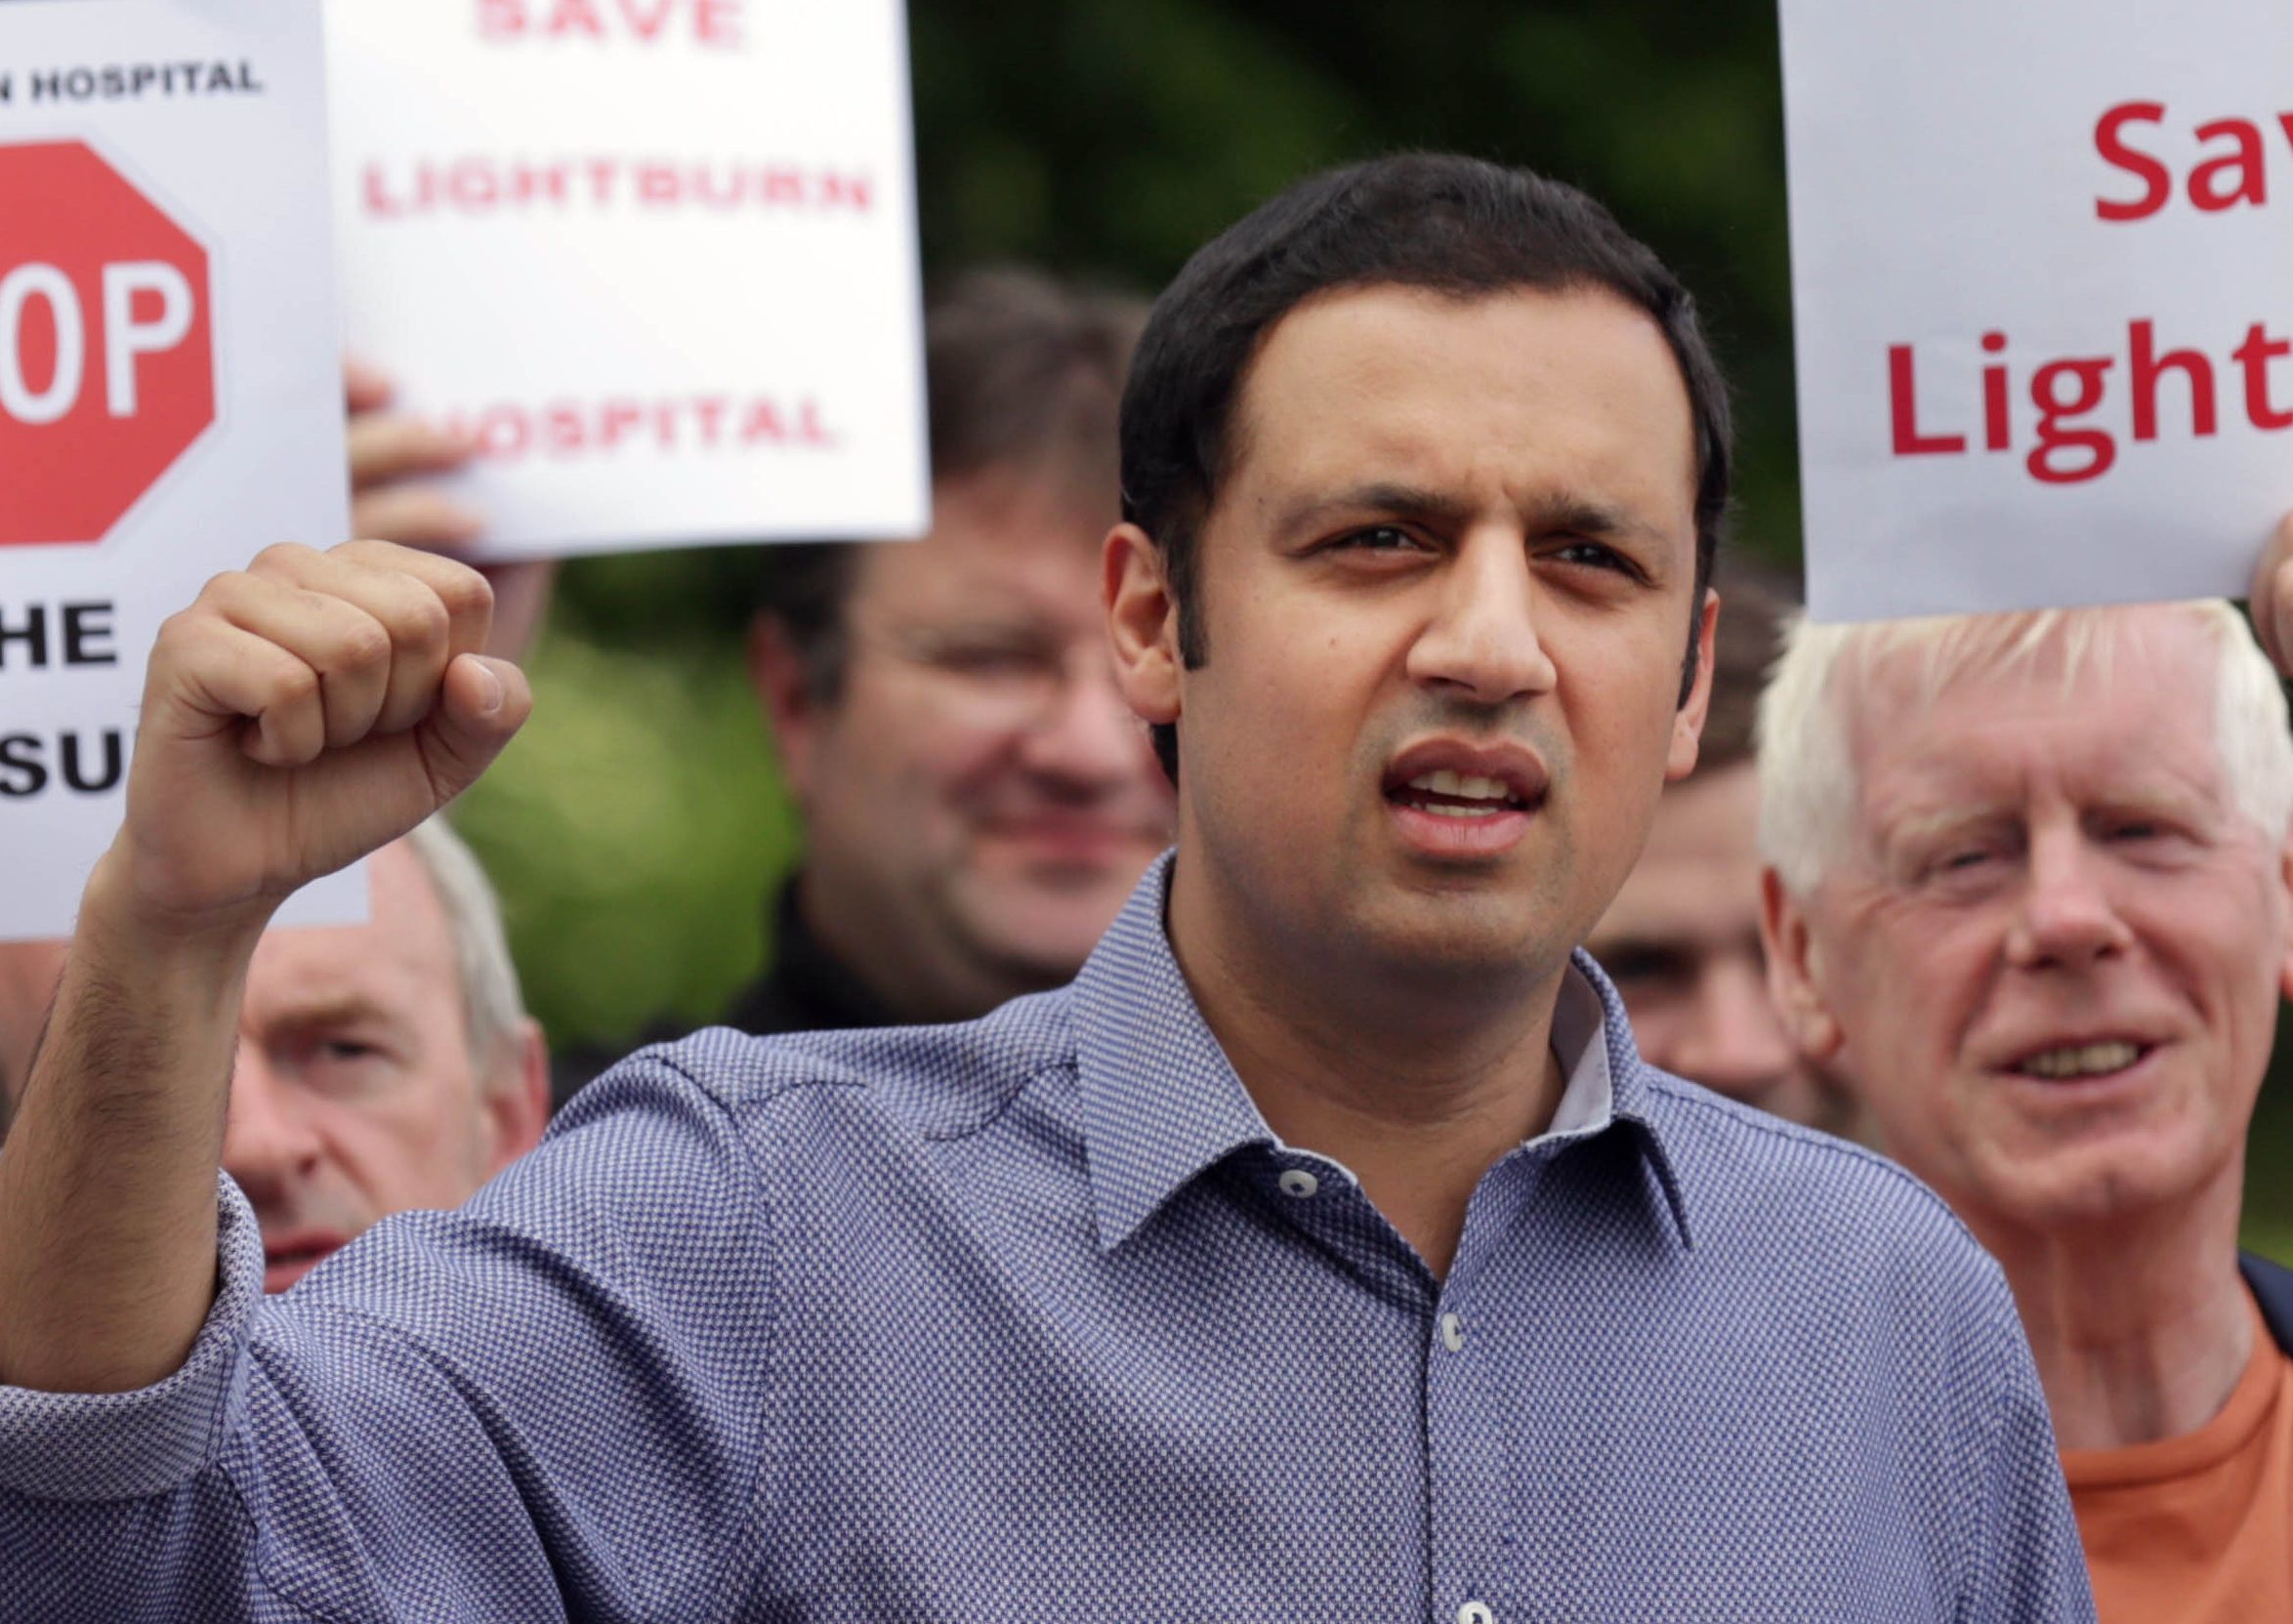 Labour's Anas Sarwar who has pledged to "reunite" his party as he announced his bid to become the next Scottish leader. (David Cheskin/PA Wire)